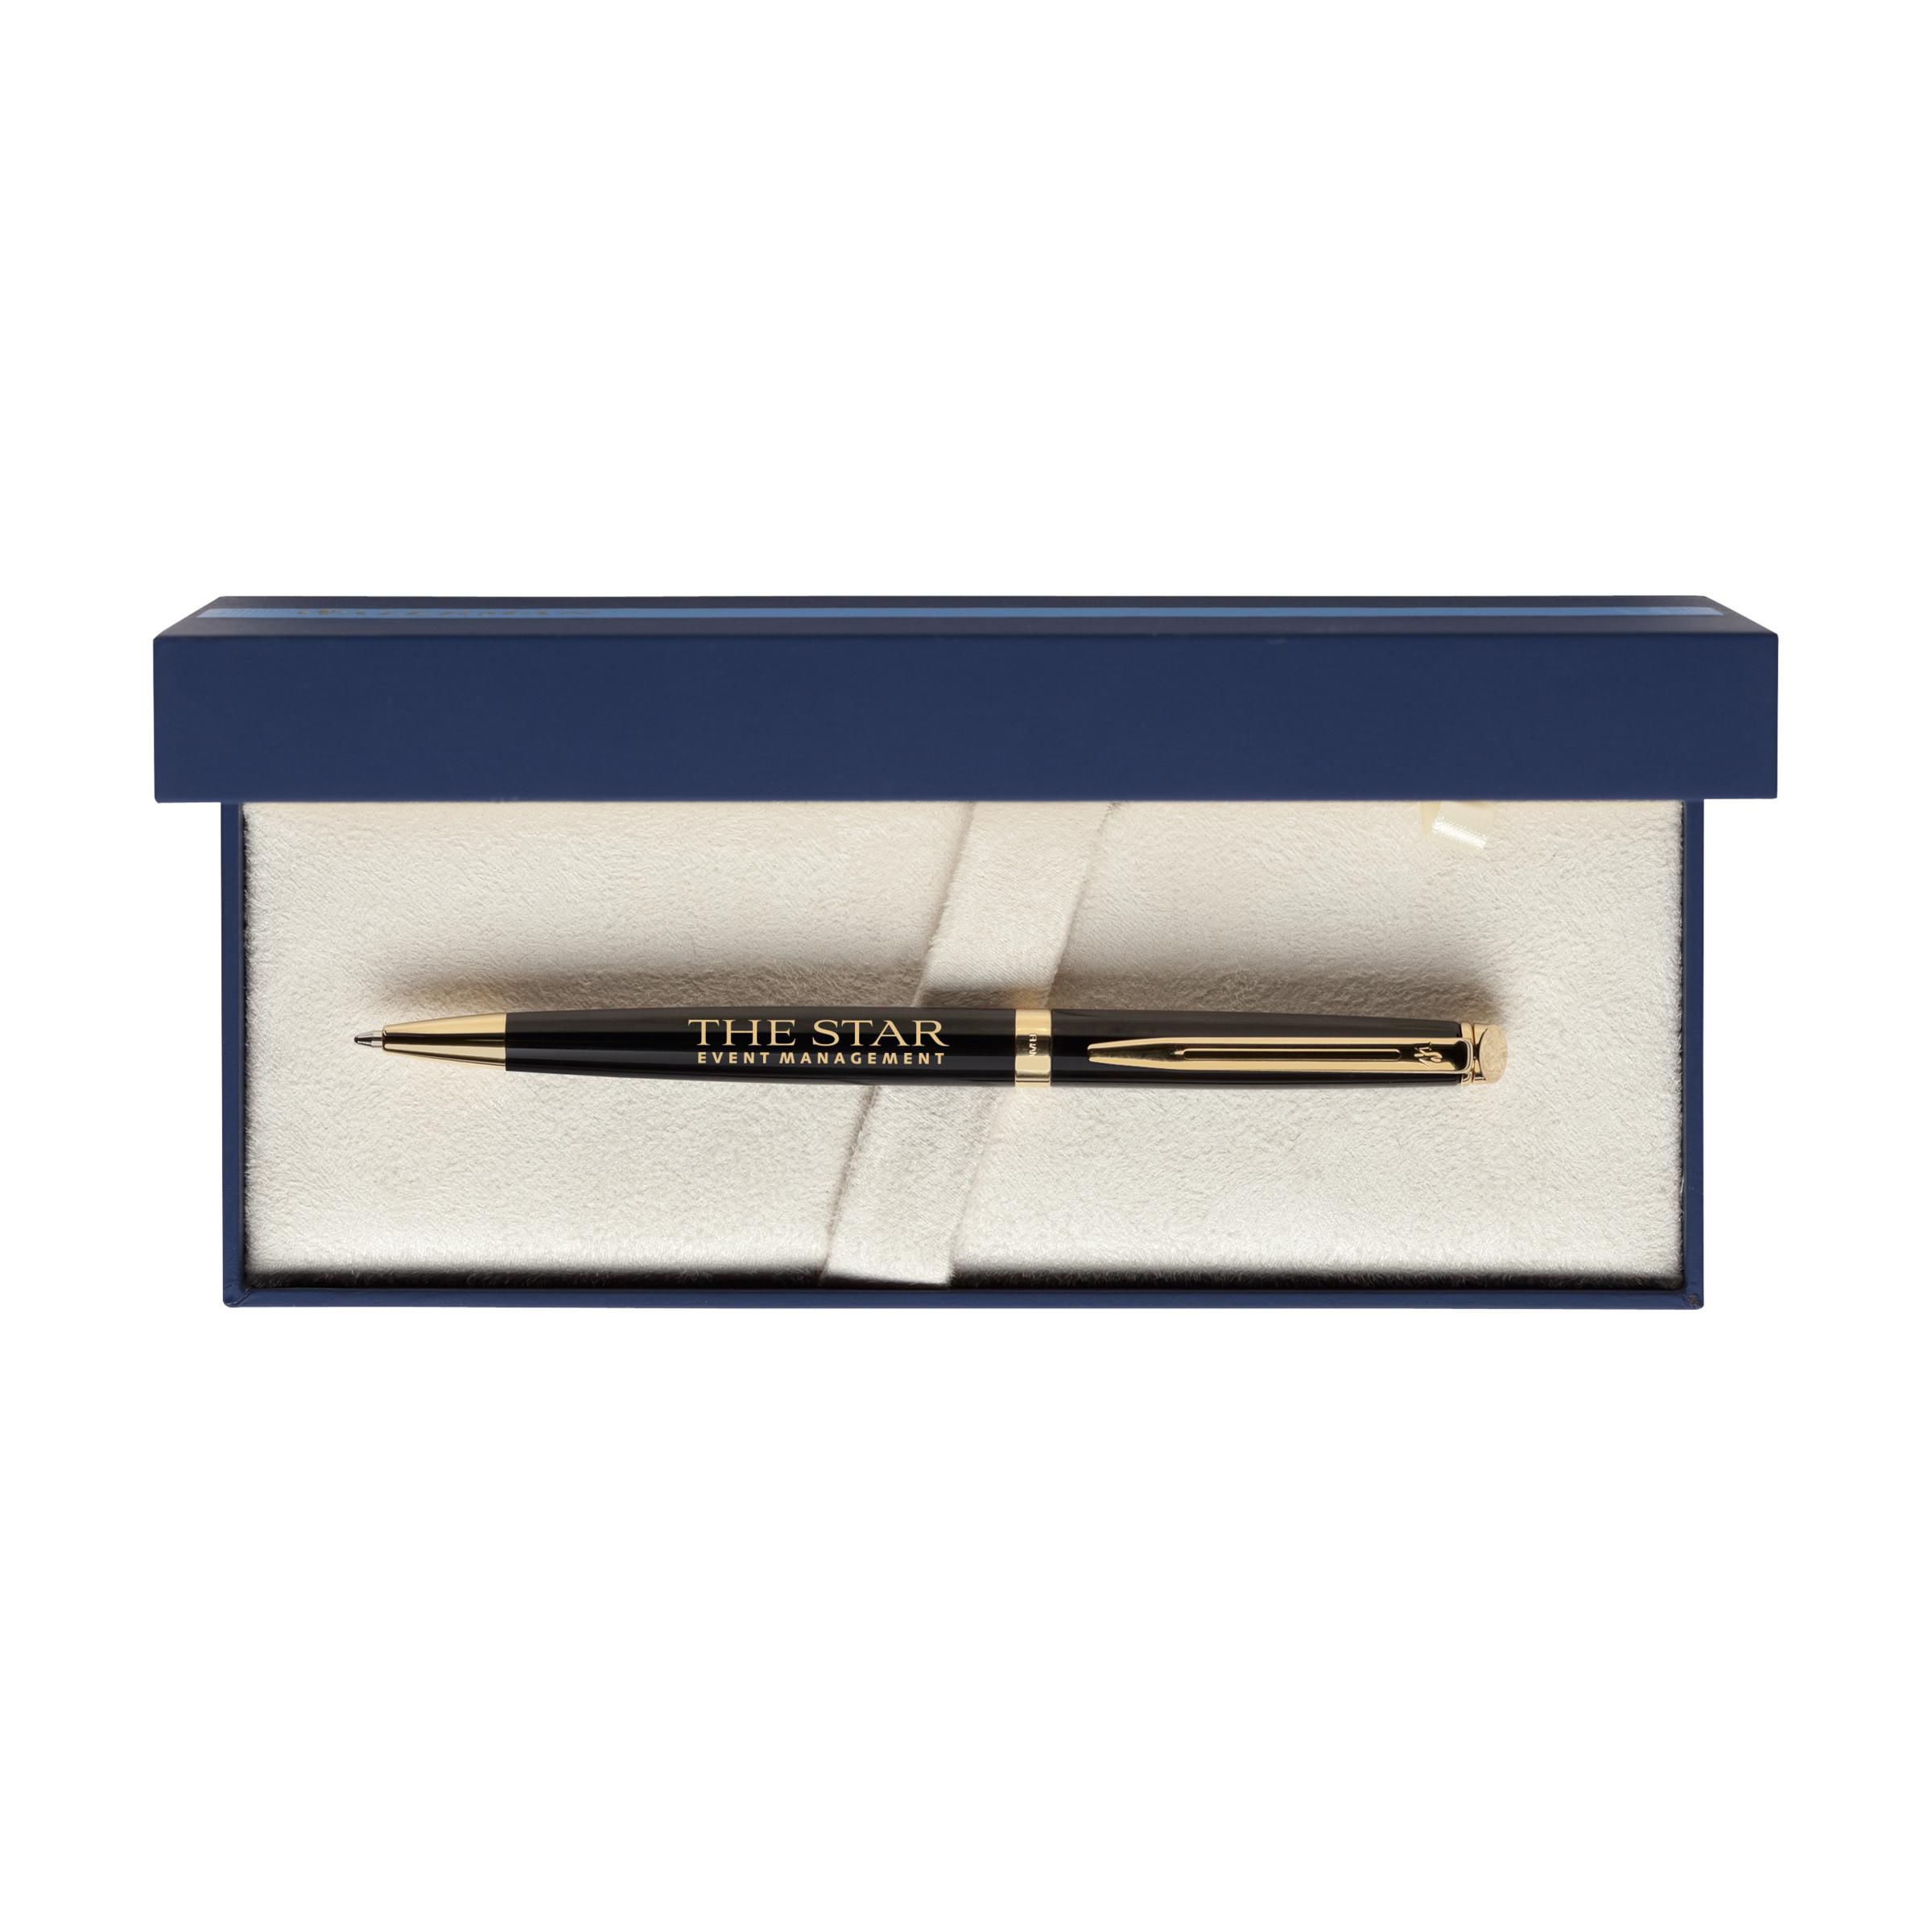 Ditchling Classic Blue Ink Pen from Waterman - Hambledon